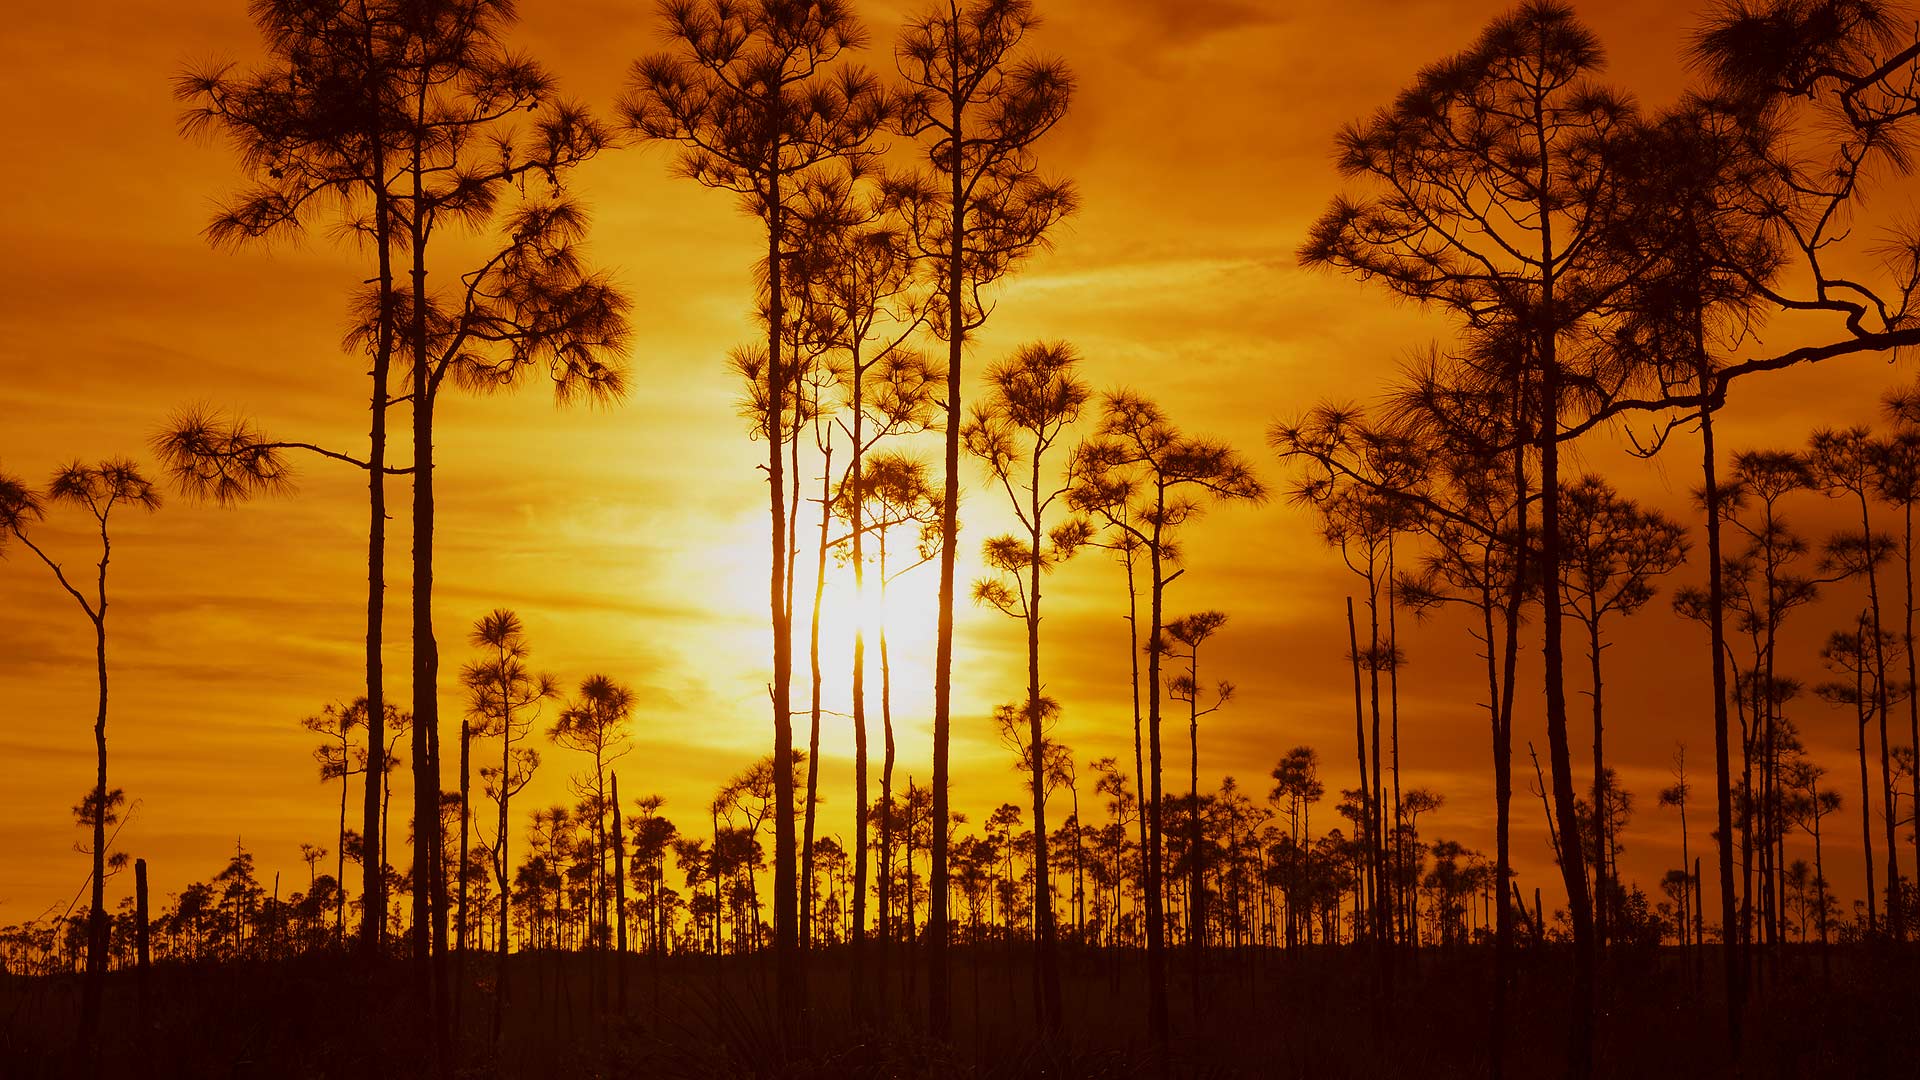 Sunset at Everglades National Park in Florida Full HD Wallpaper